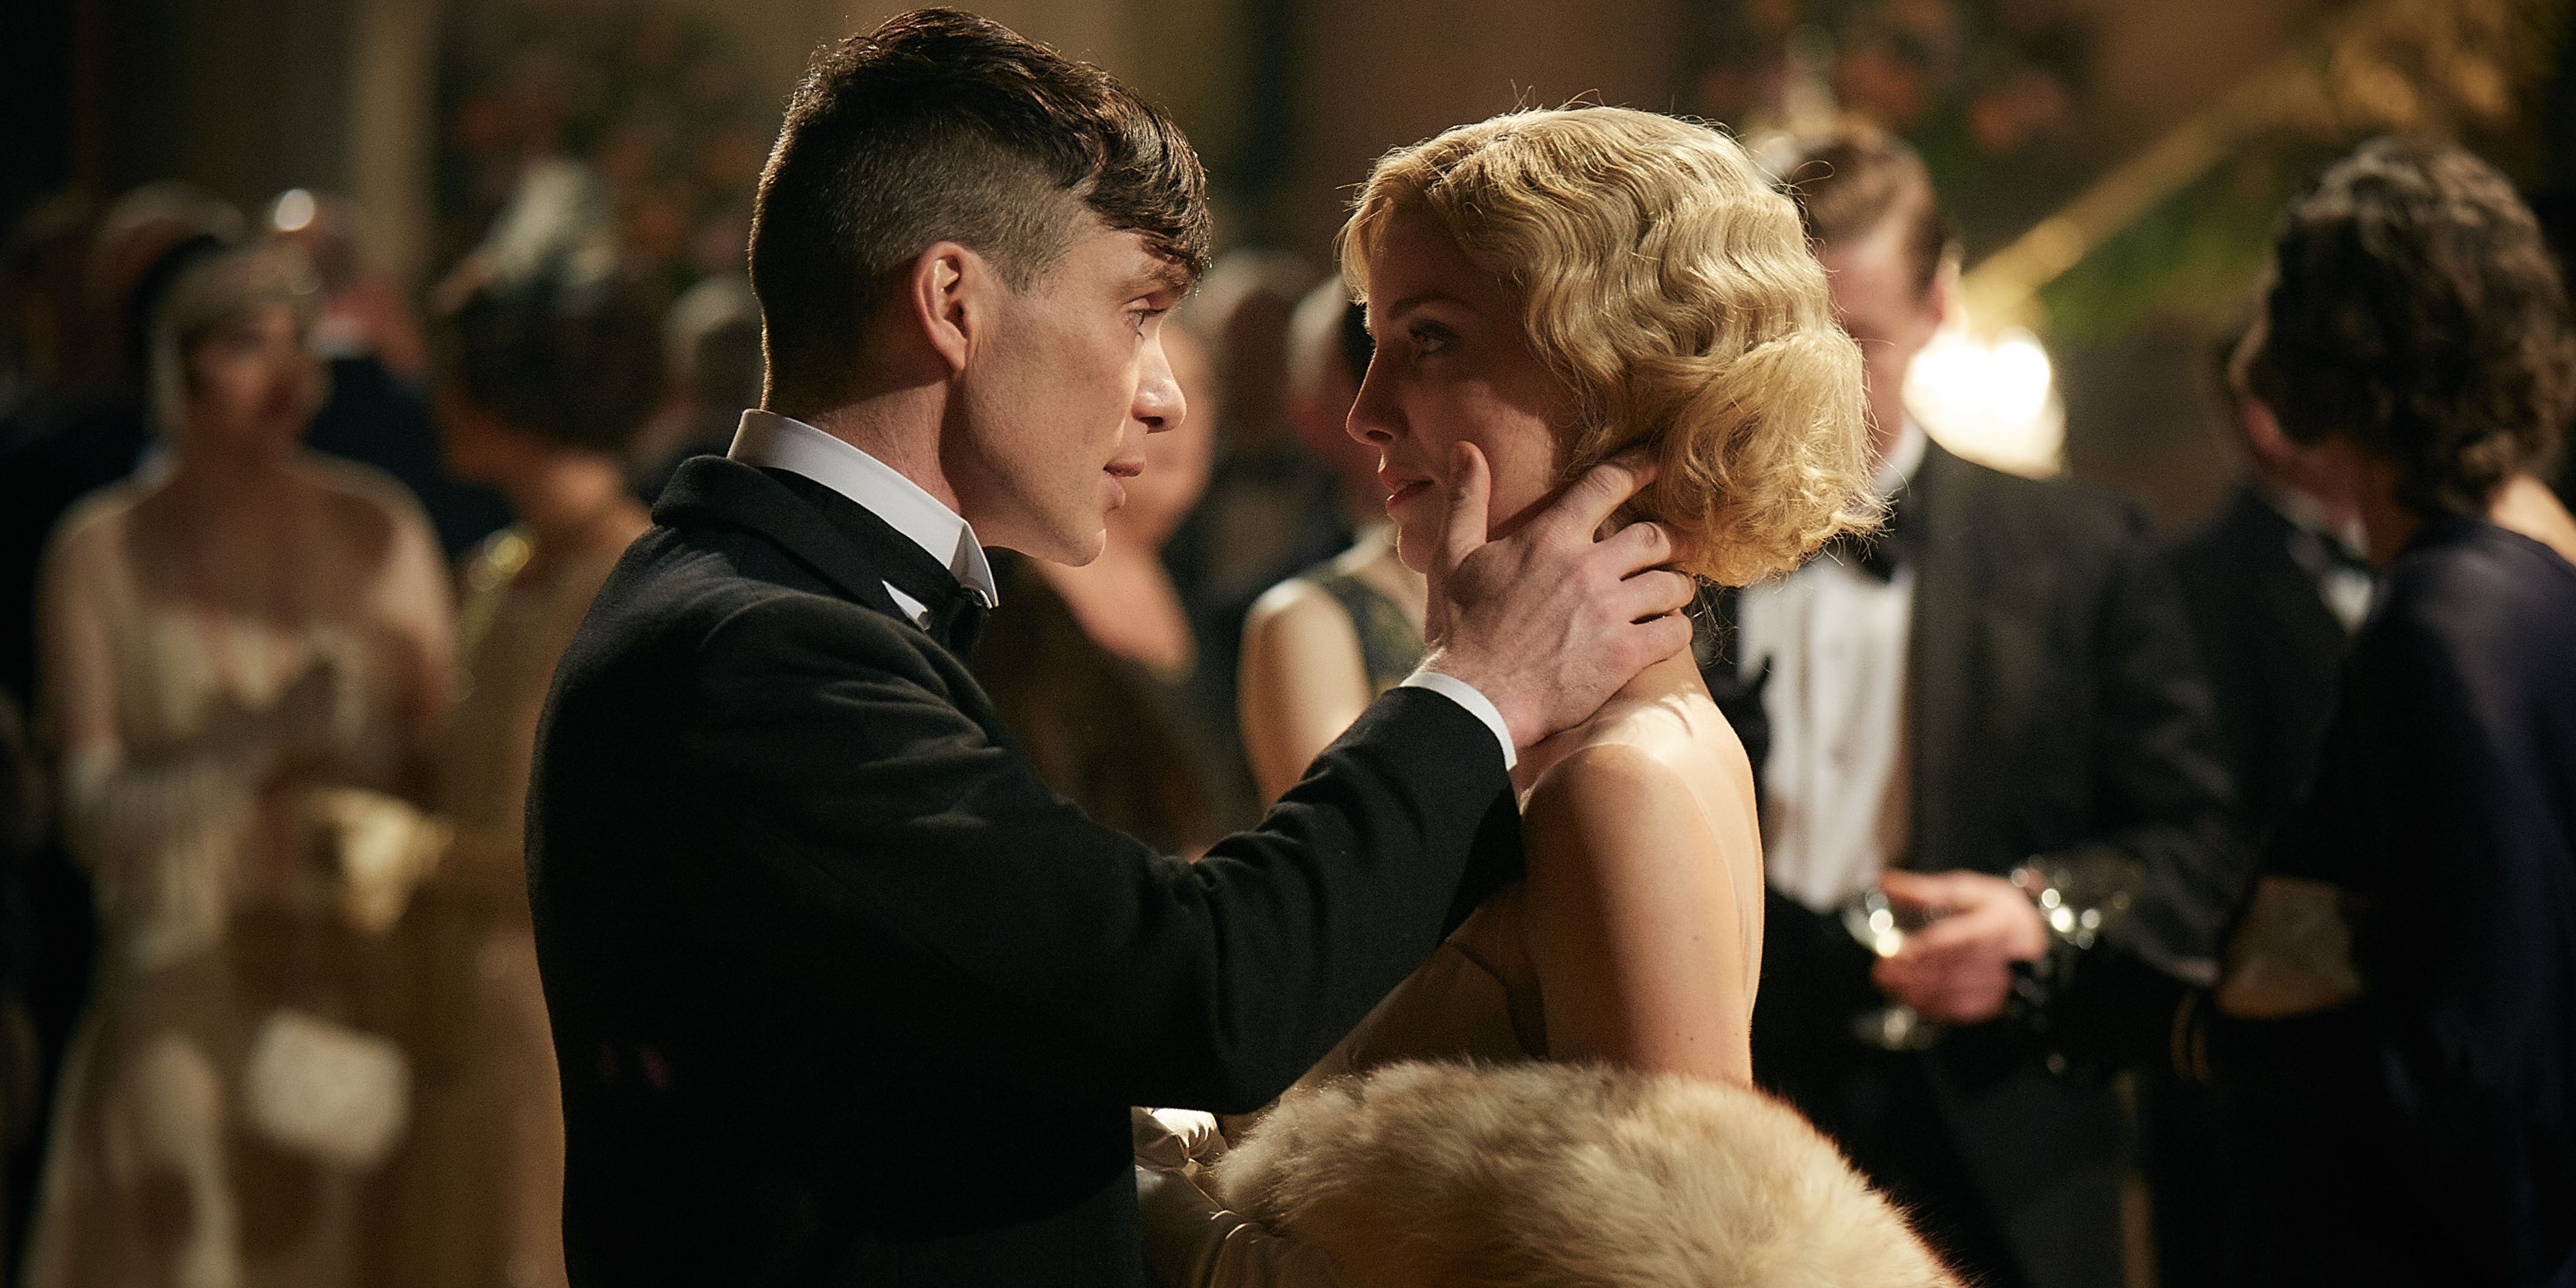 Peaky Blinders What Your Favorite Character Says About You